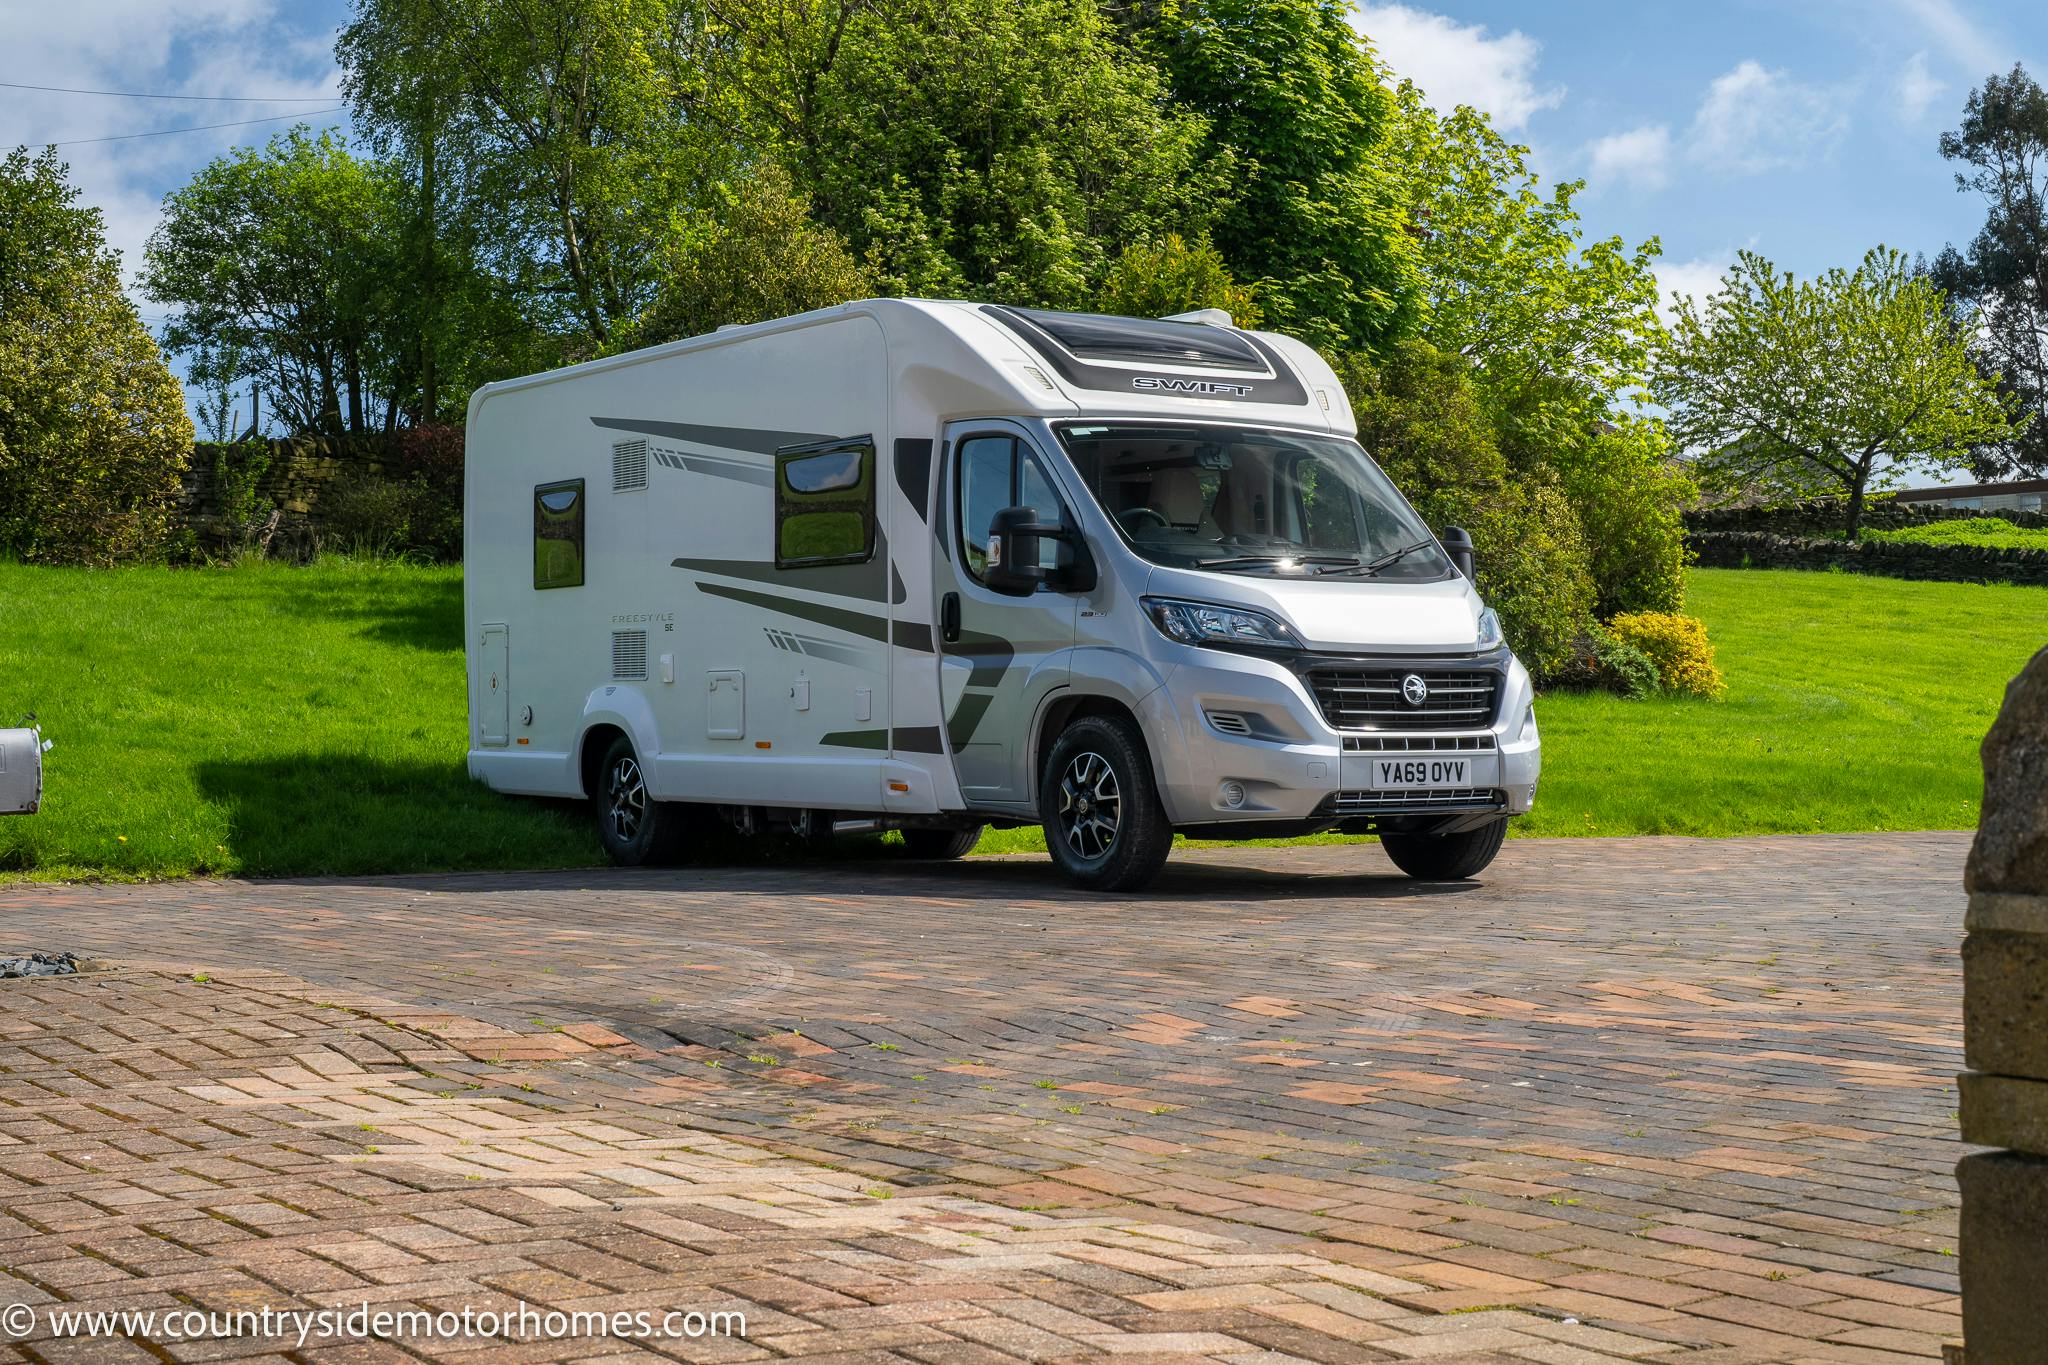 A beige and gray motorhome, a 2019 Swift Escape 694 Freestyle, is parked on a paved driveway beside a grassy area with trees in the background. The motorhome basks under the sunny sky with scattered clouds. The license plate on the motorhome reads "YA69 DWY.